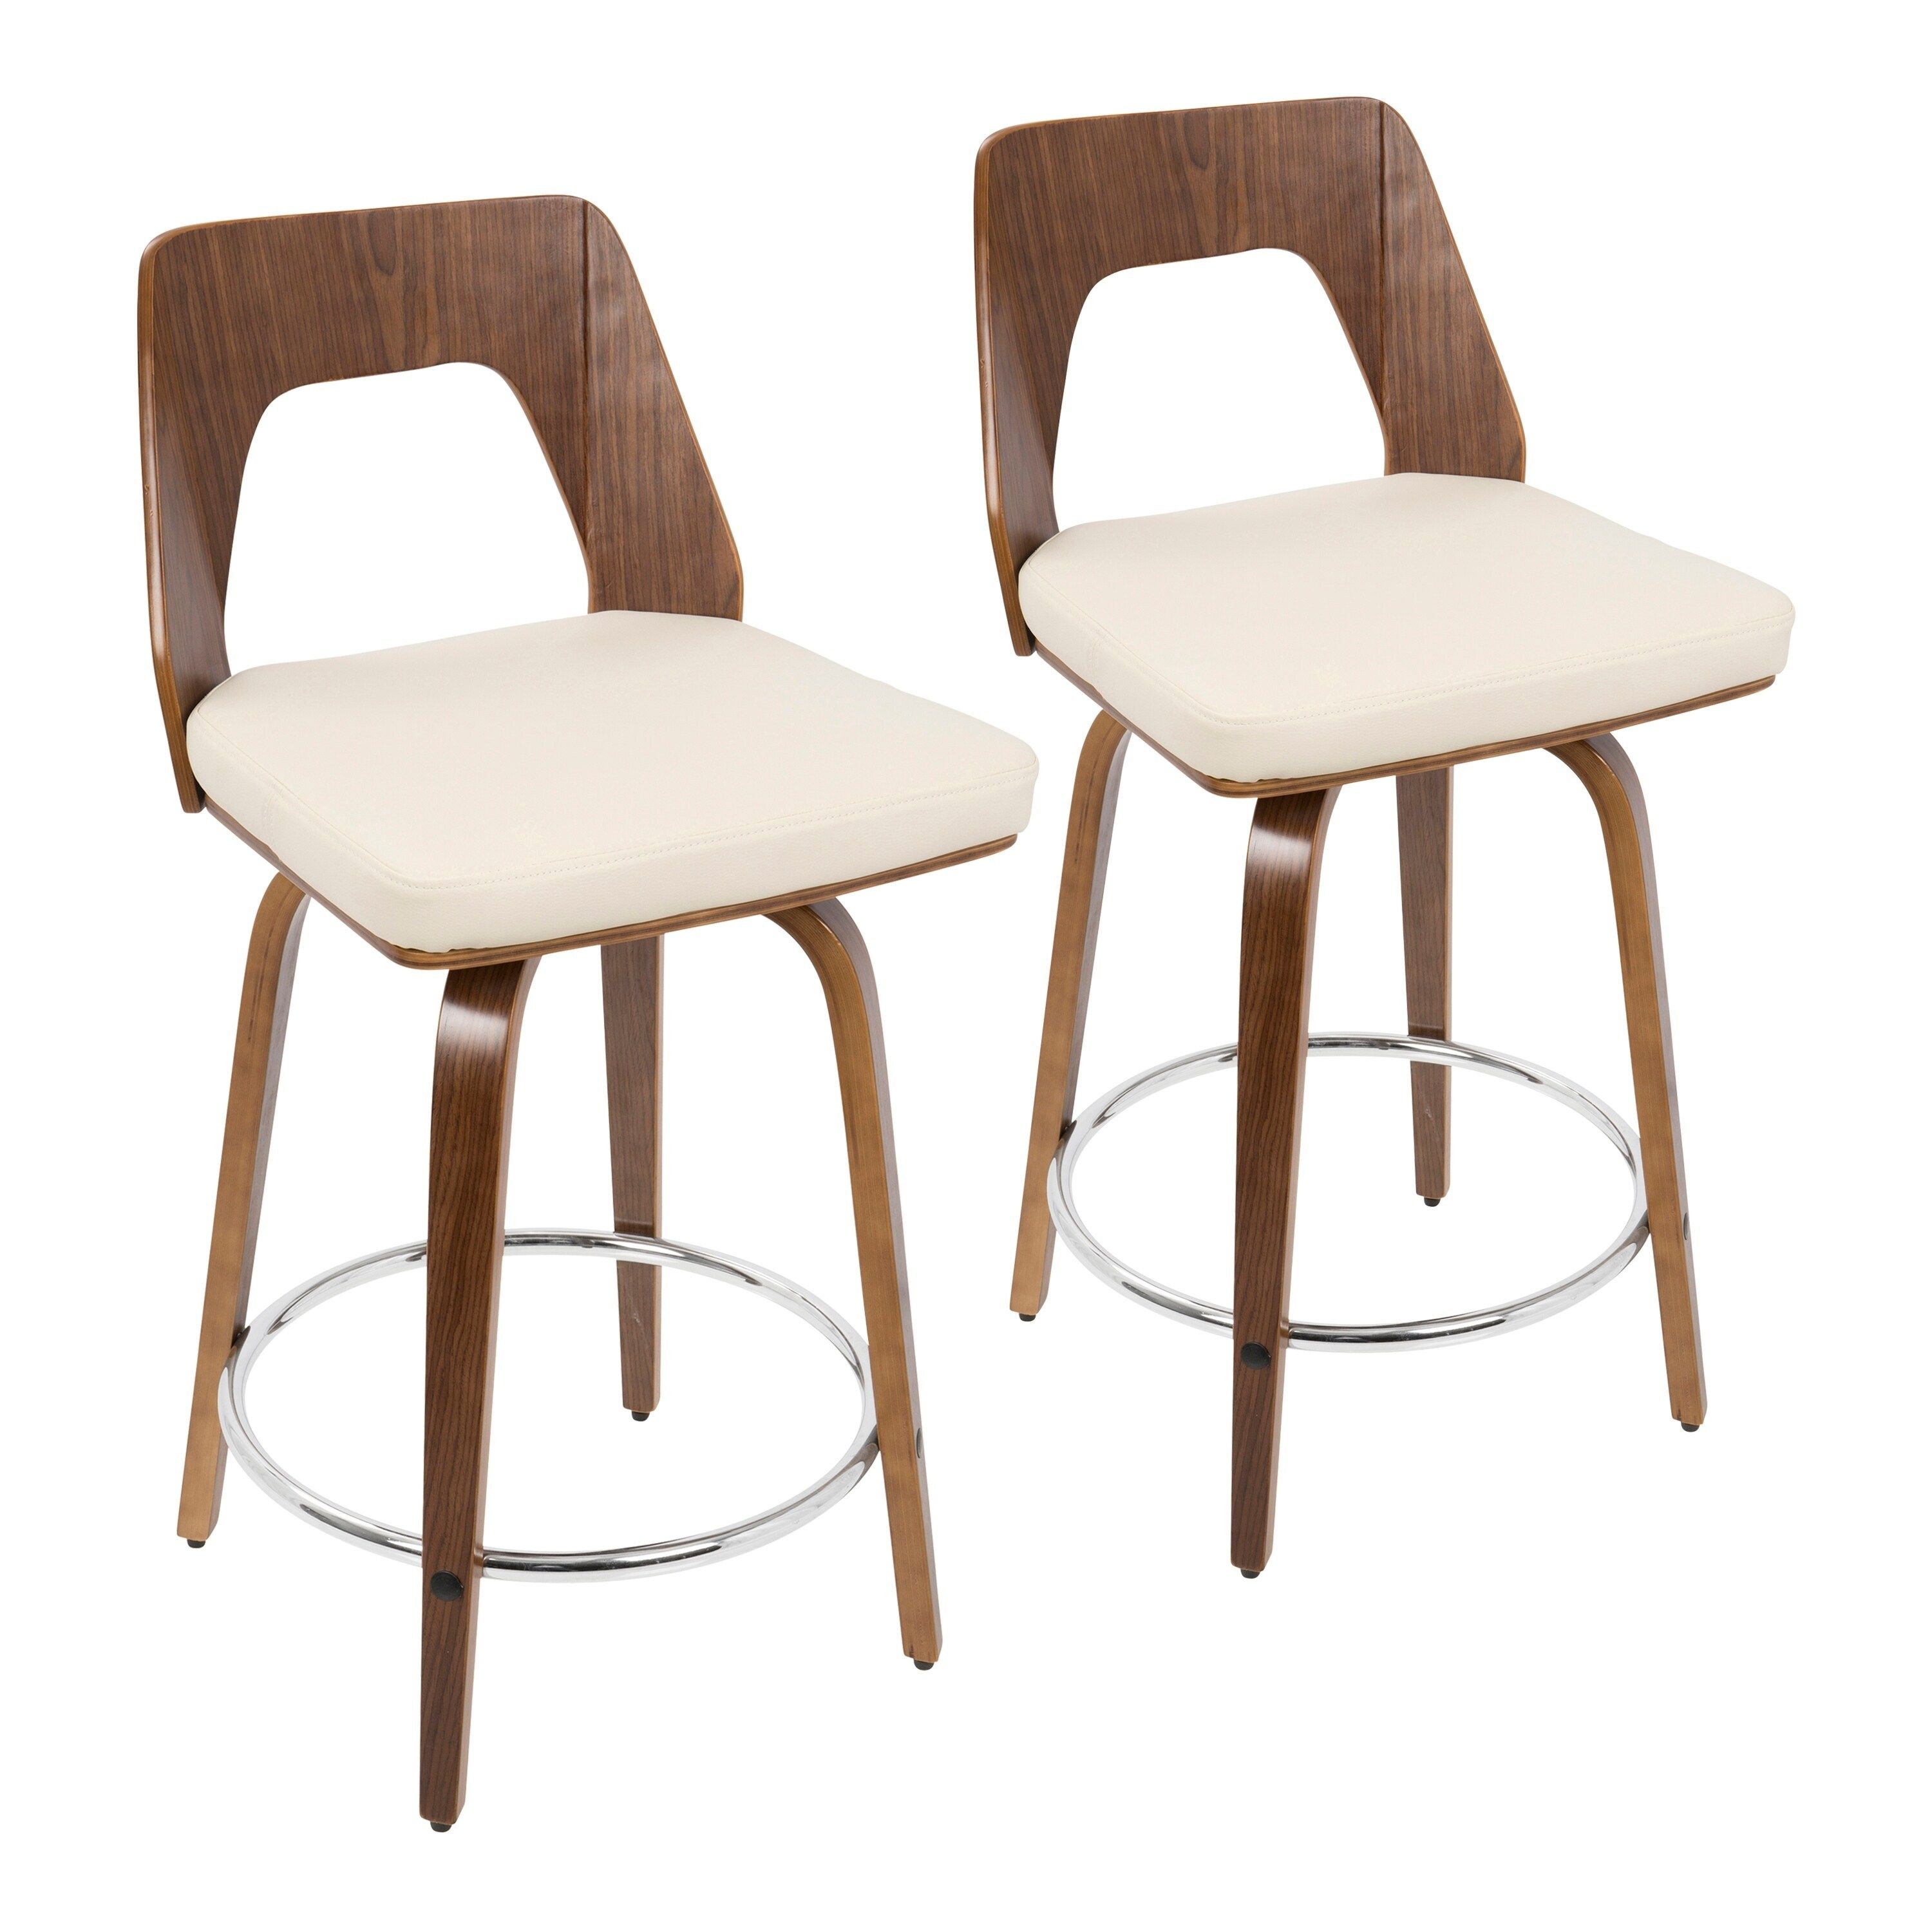 LumiSource Trilogy Mid-Century Modern Counter Stool (Set of 2) - cream faux leather | Bed Bath & Beyond